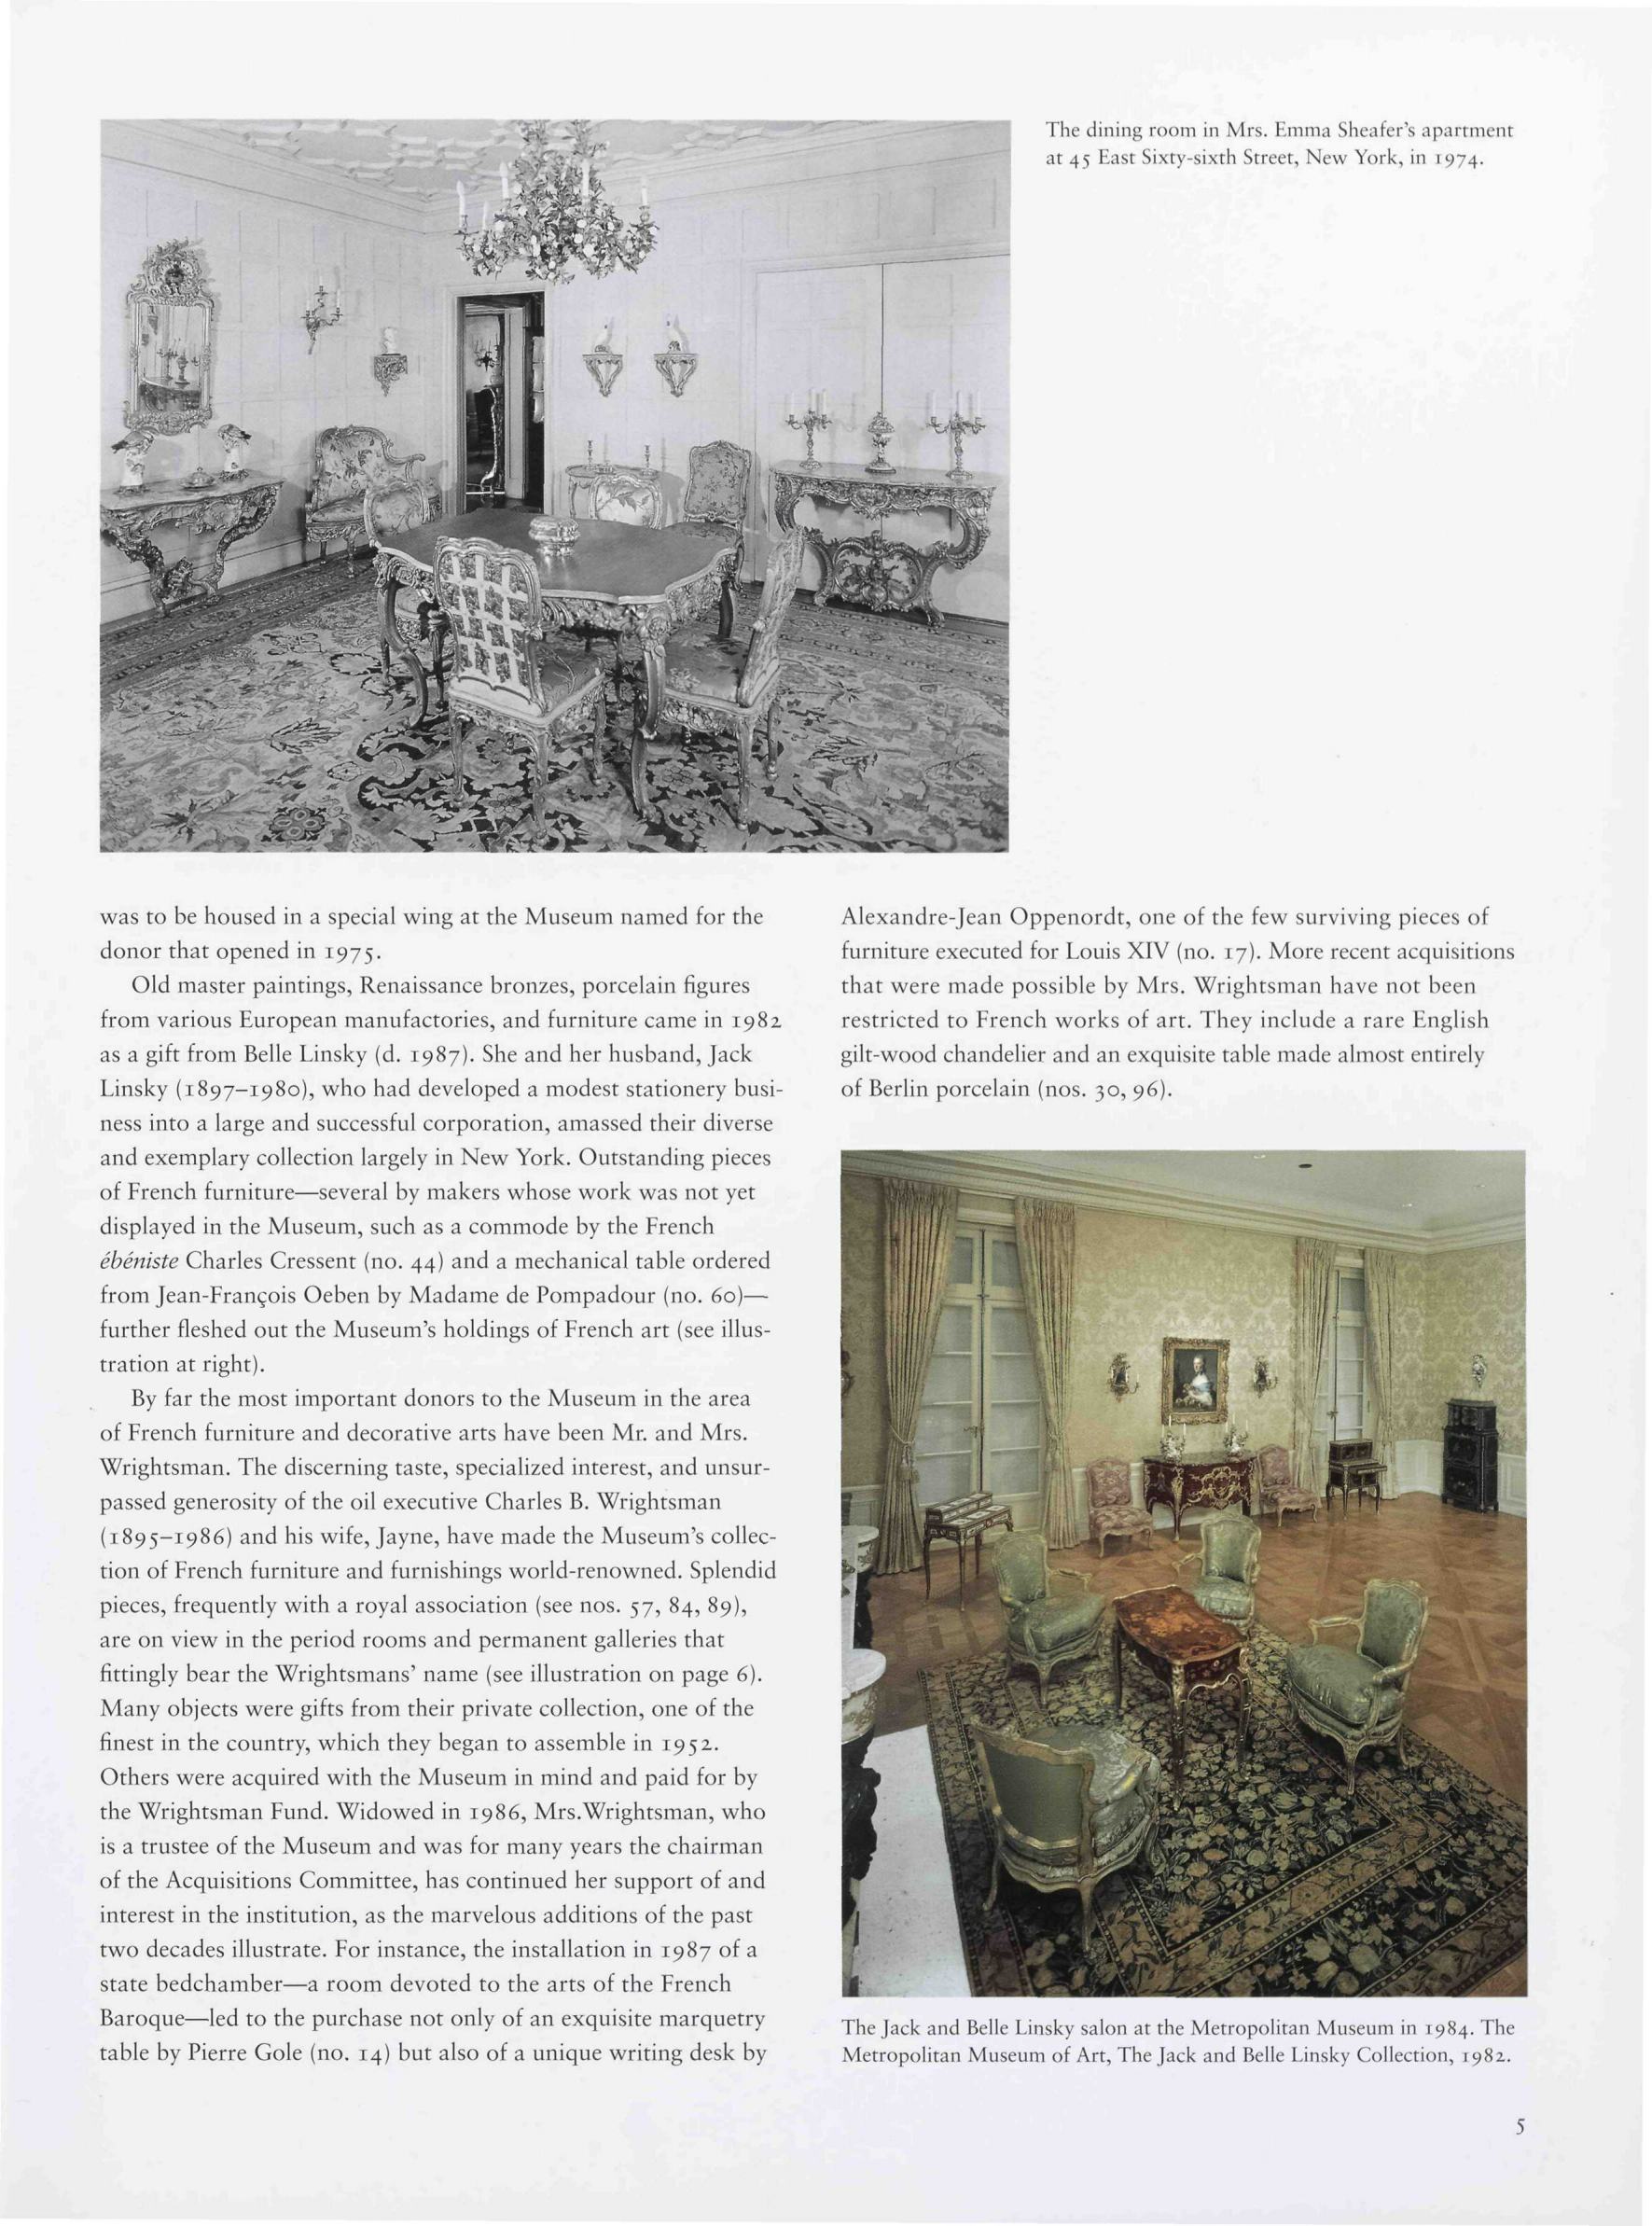 European Furniture in The Metropolitan Museum of Art: Highlights of the Collection / Daniëlle O. Kisluk-Grosheide, Wolfram Koeppe, William Rieder ; Photography by Joseph Coscia, Jr. — NewYork : The Metropolitan Museum of Art ; New Haven and London : Yale University Press, 2006